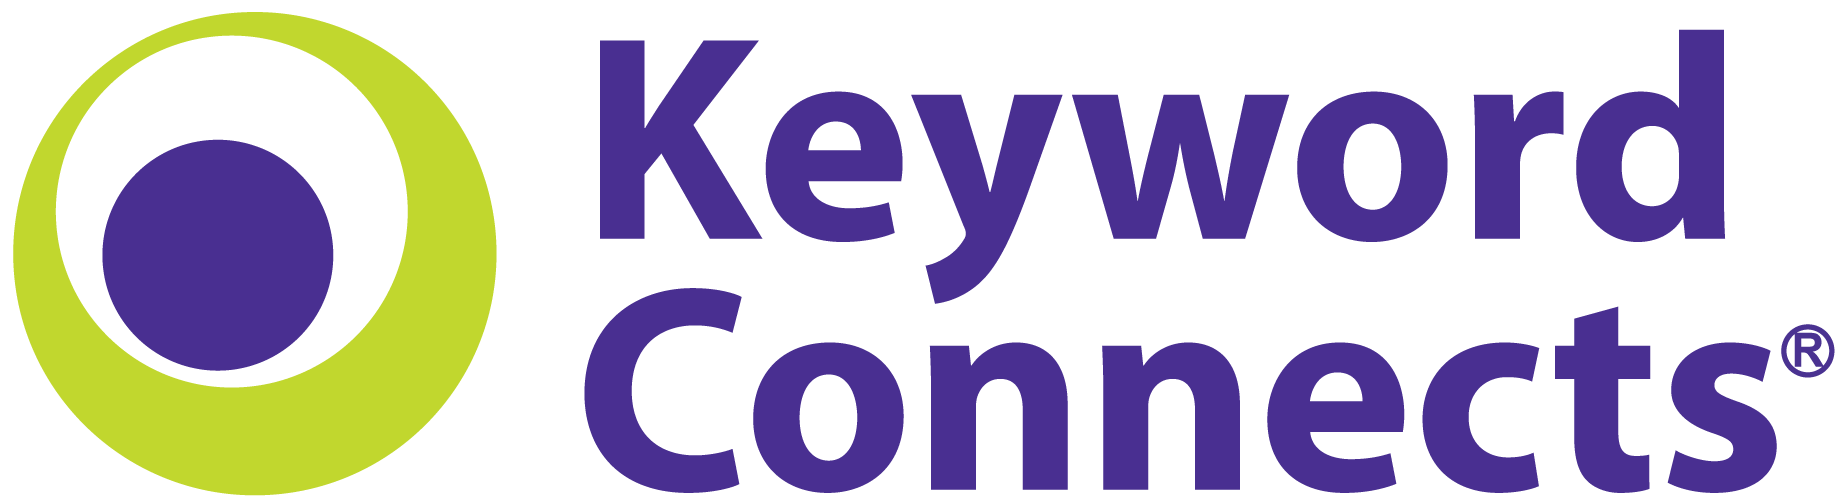 Keyword Connects